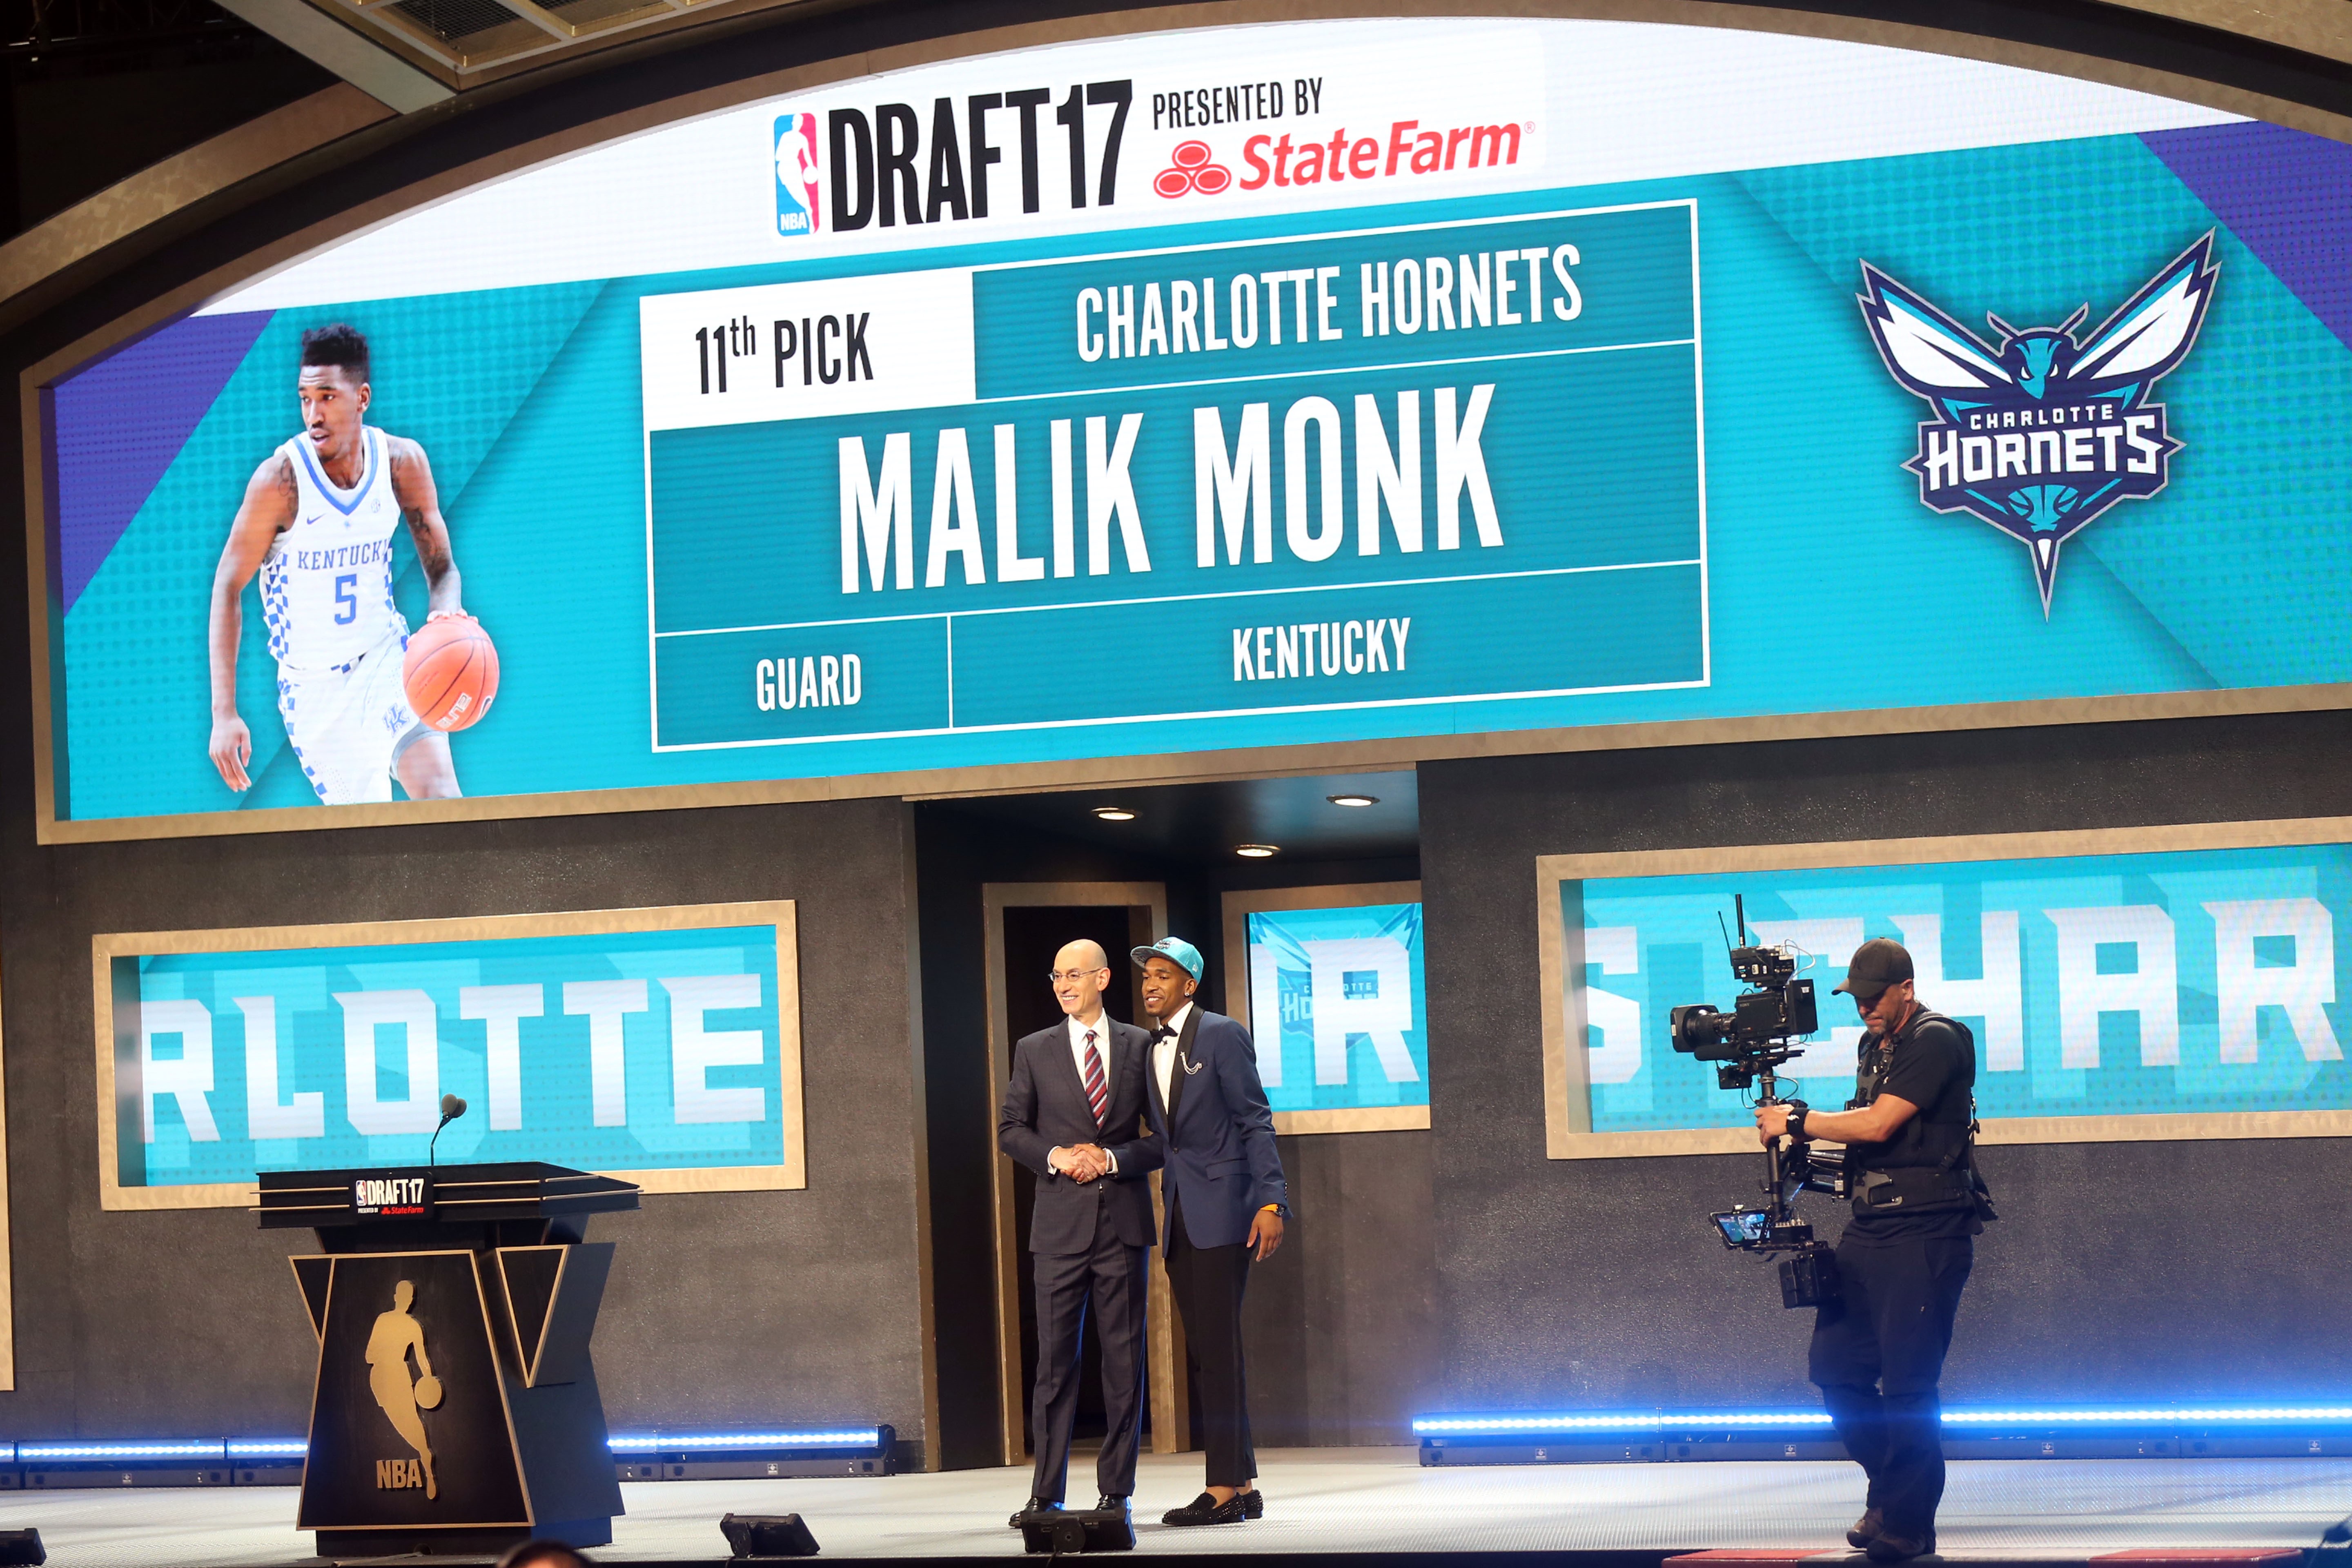 Charlotte Hornets NBA Lottery odds for the No. 1 draft pick